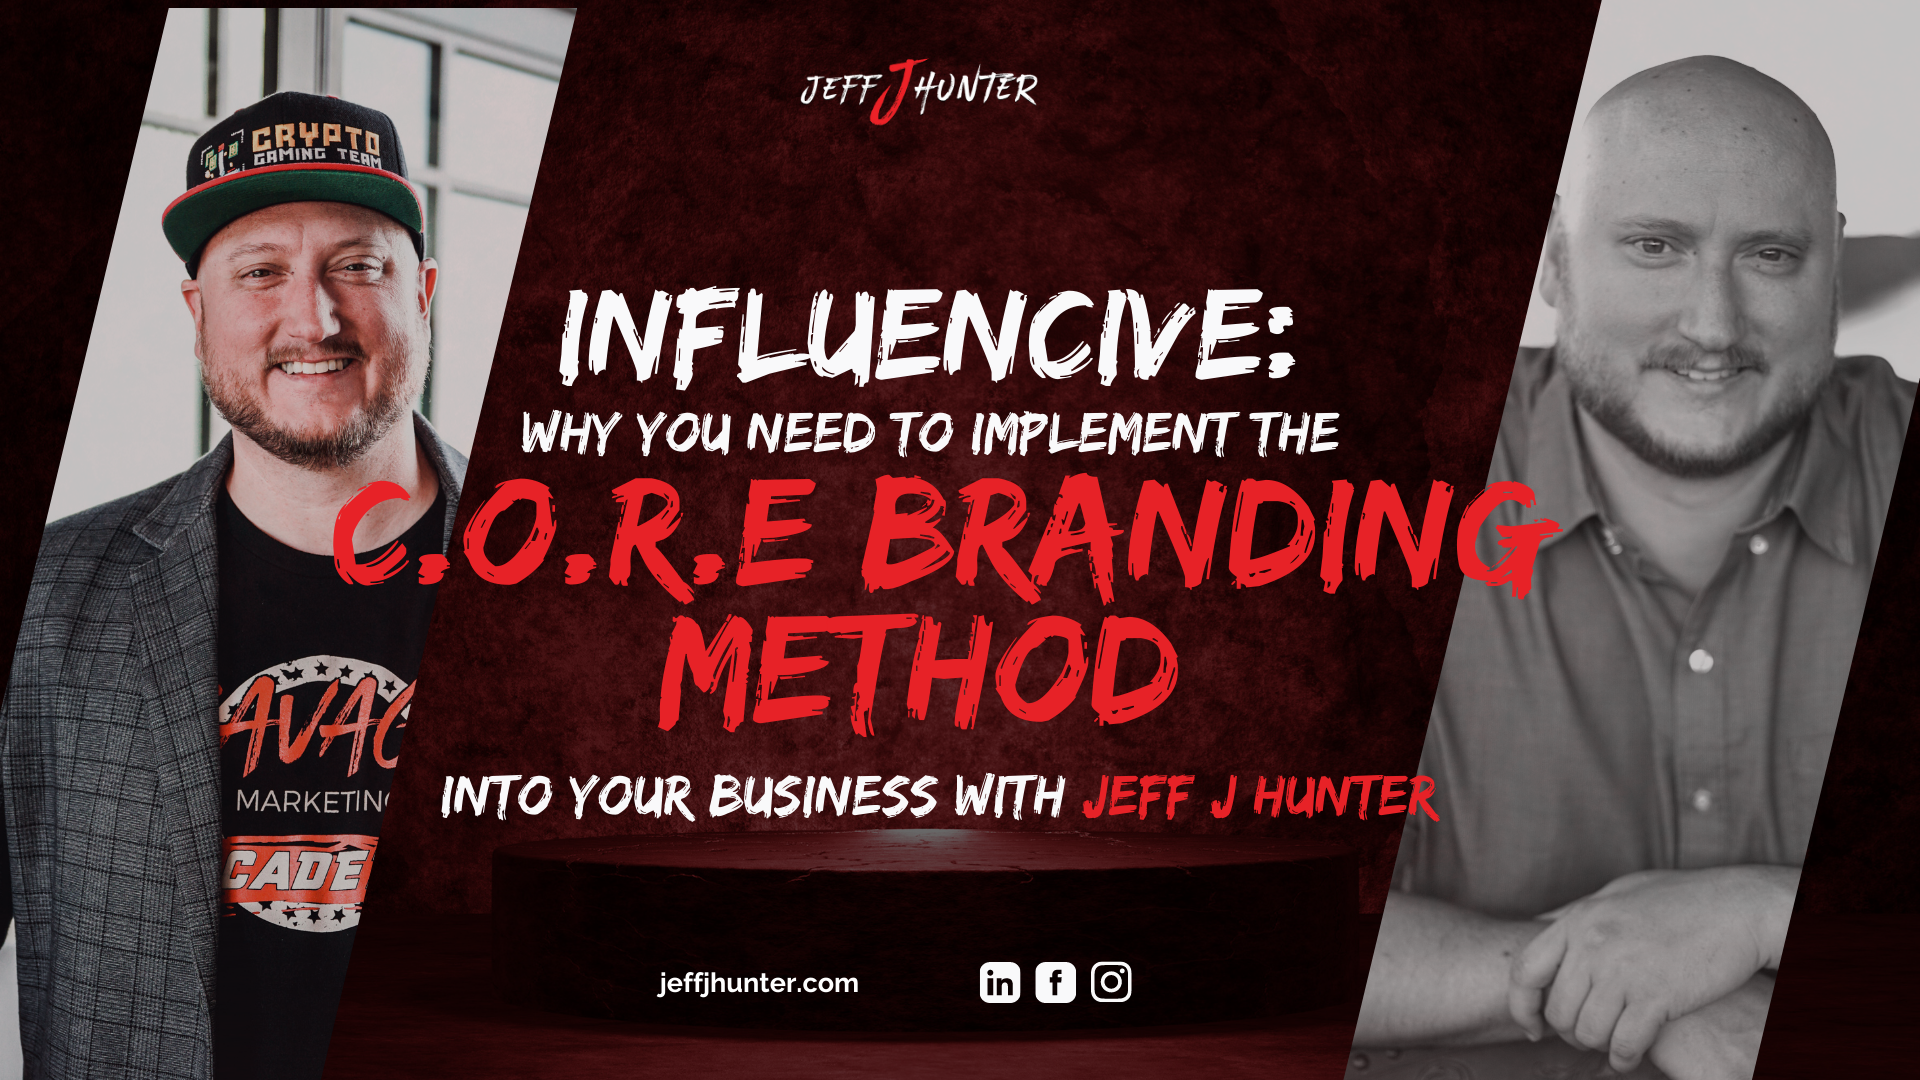 Influencive: Why You Need to Implement the C.O.R.E Branding Method into  Your Business with Jeff J. Hunter - Jeff J Hunter